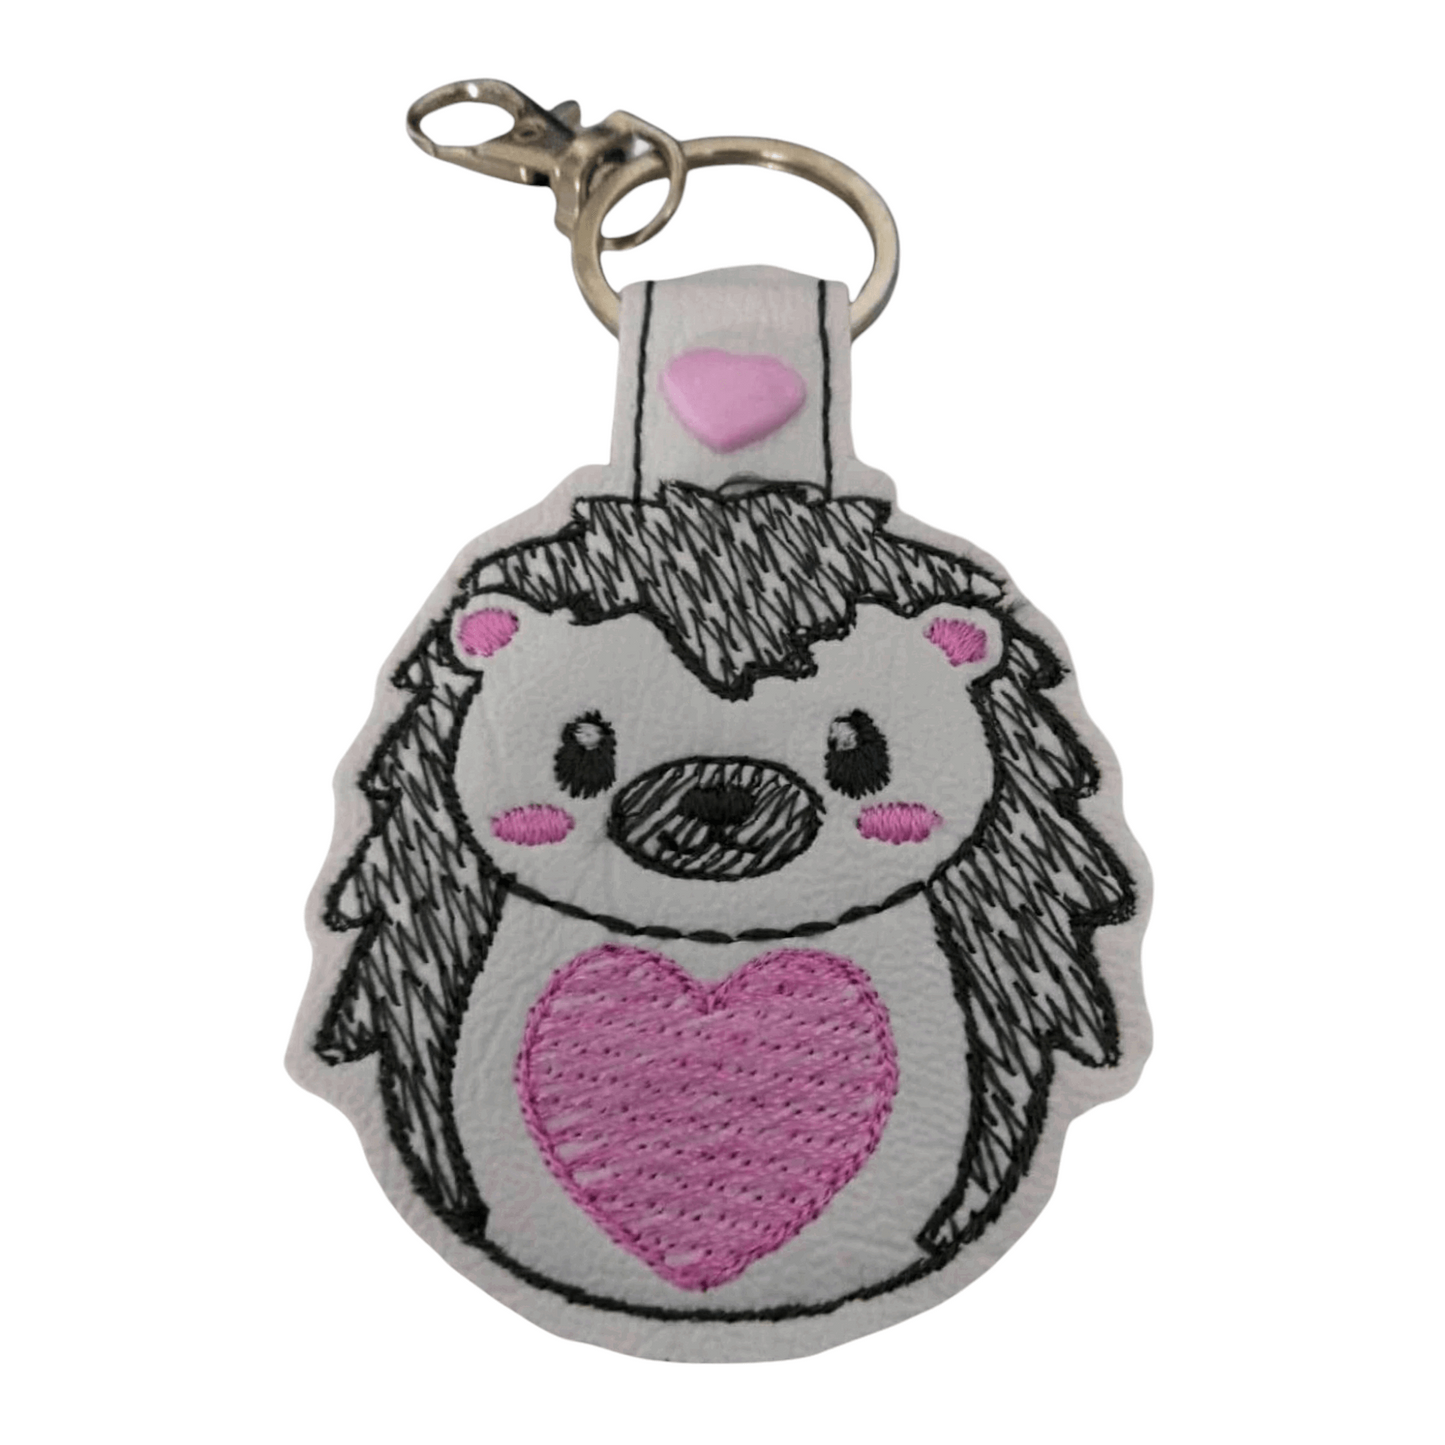 Hedgehog with Pink Heart Keychain, cute bag tag, made in Australia - Lil-aiges Creations - Quality Australian-made Gifts